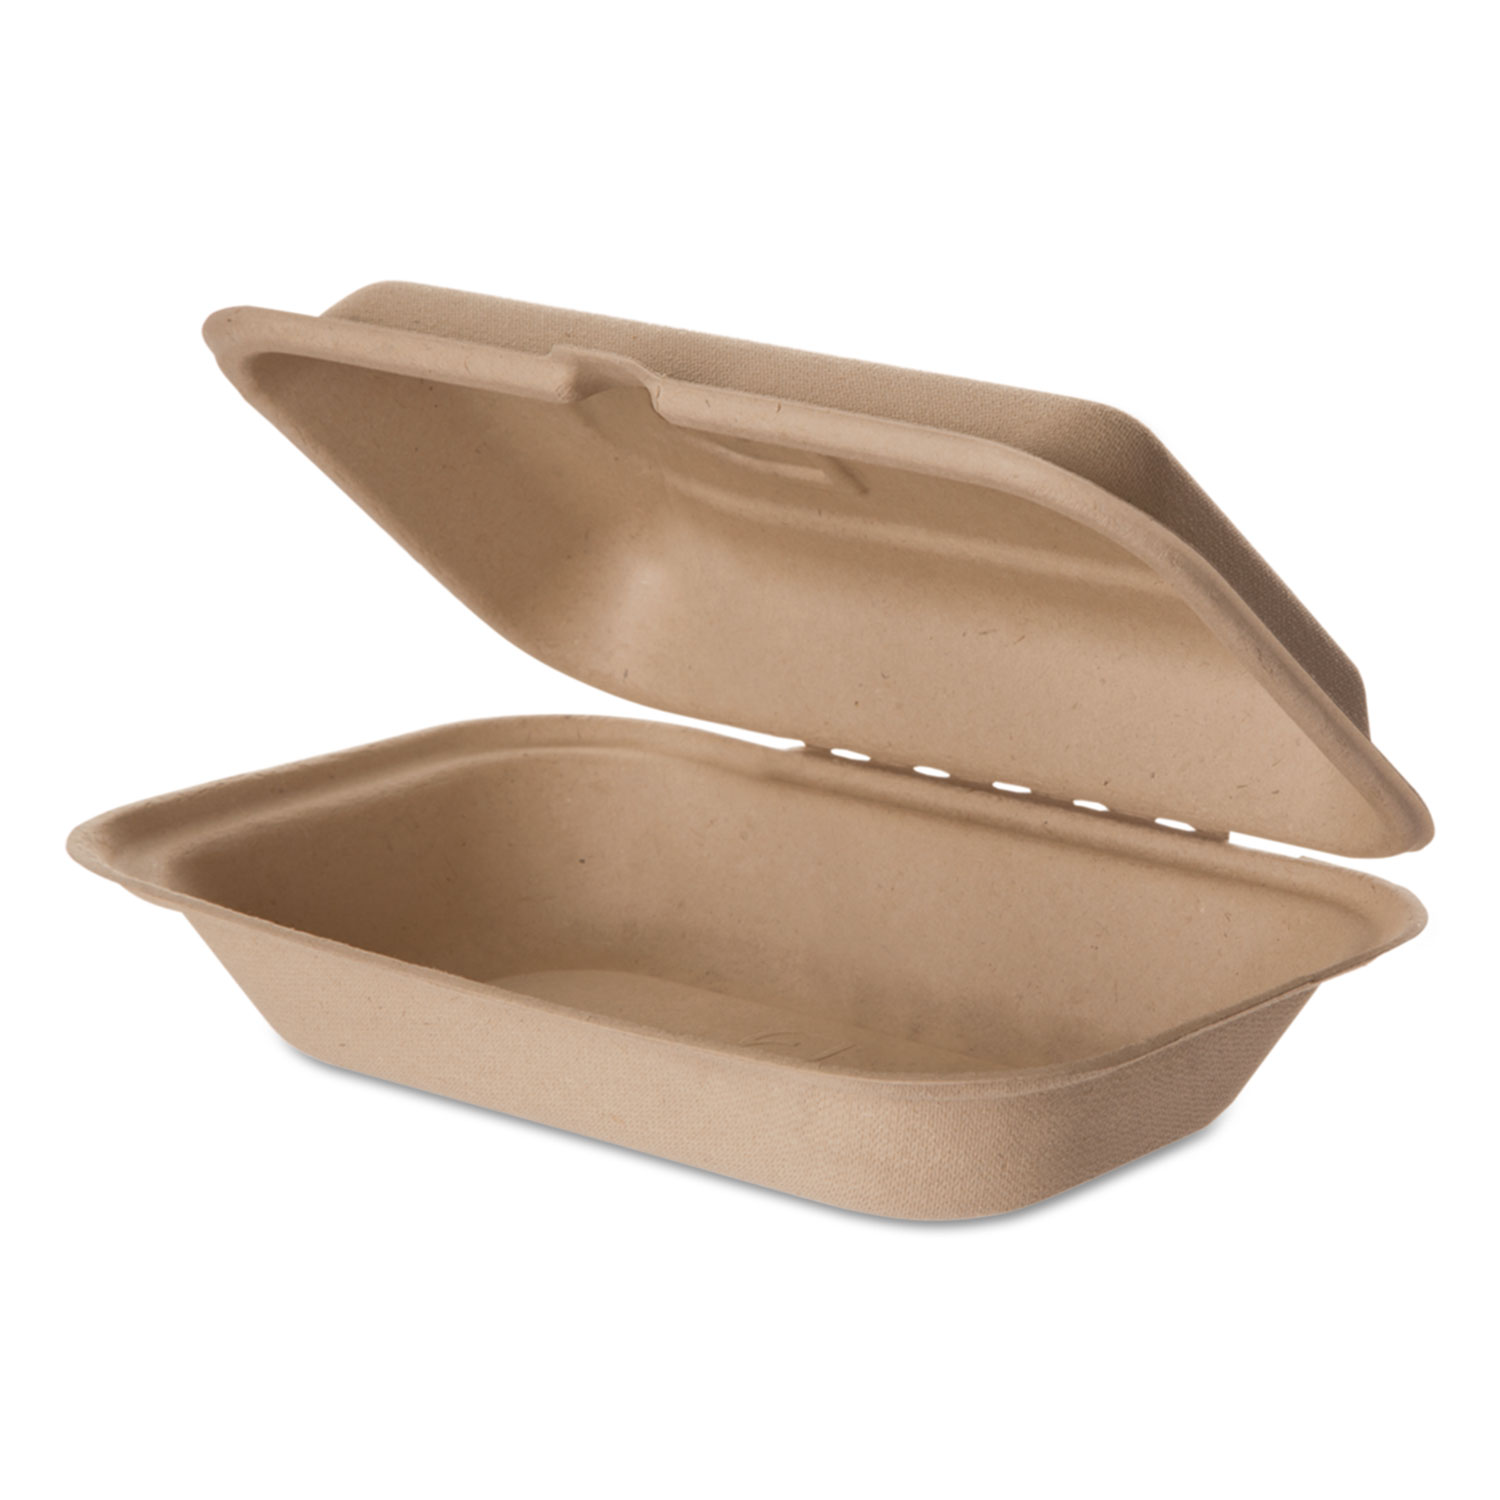 Wheat Straw Hinged Clamshell Containers, 6 x 9 x 3, 300/Carton